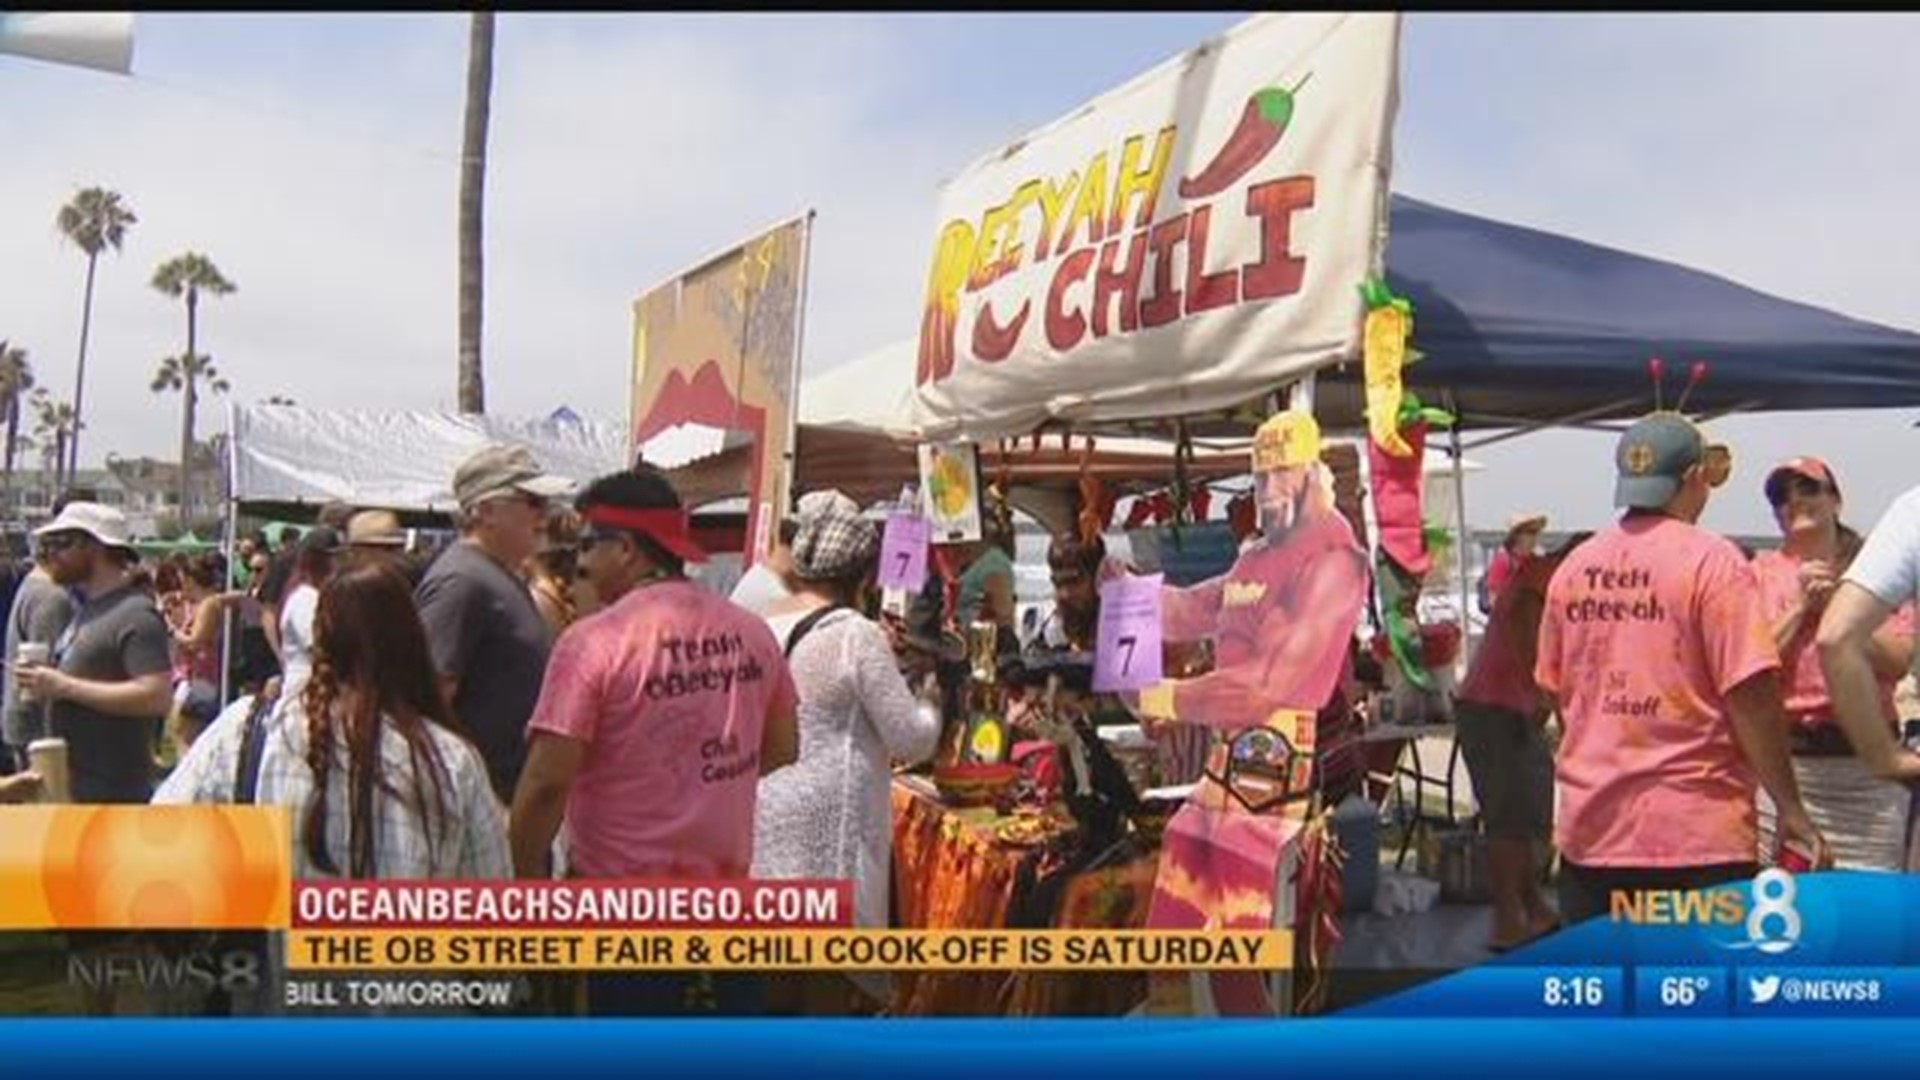 Celebrate Summer of Love at 38th Annual OB Street Fair and Chili Cook